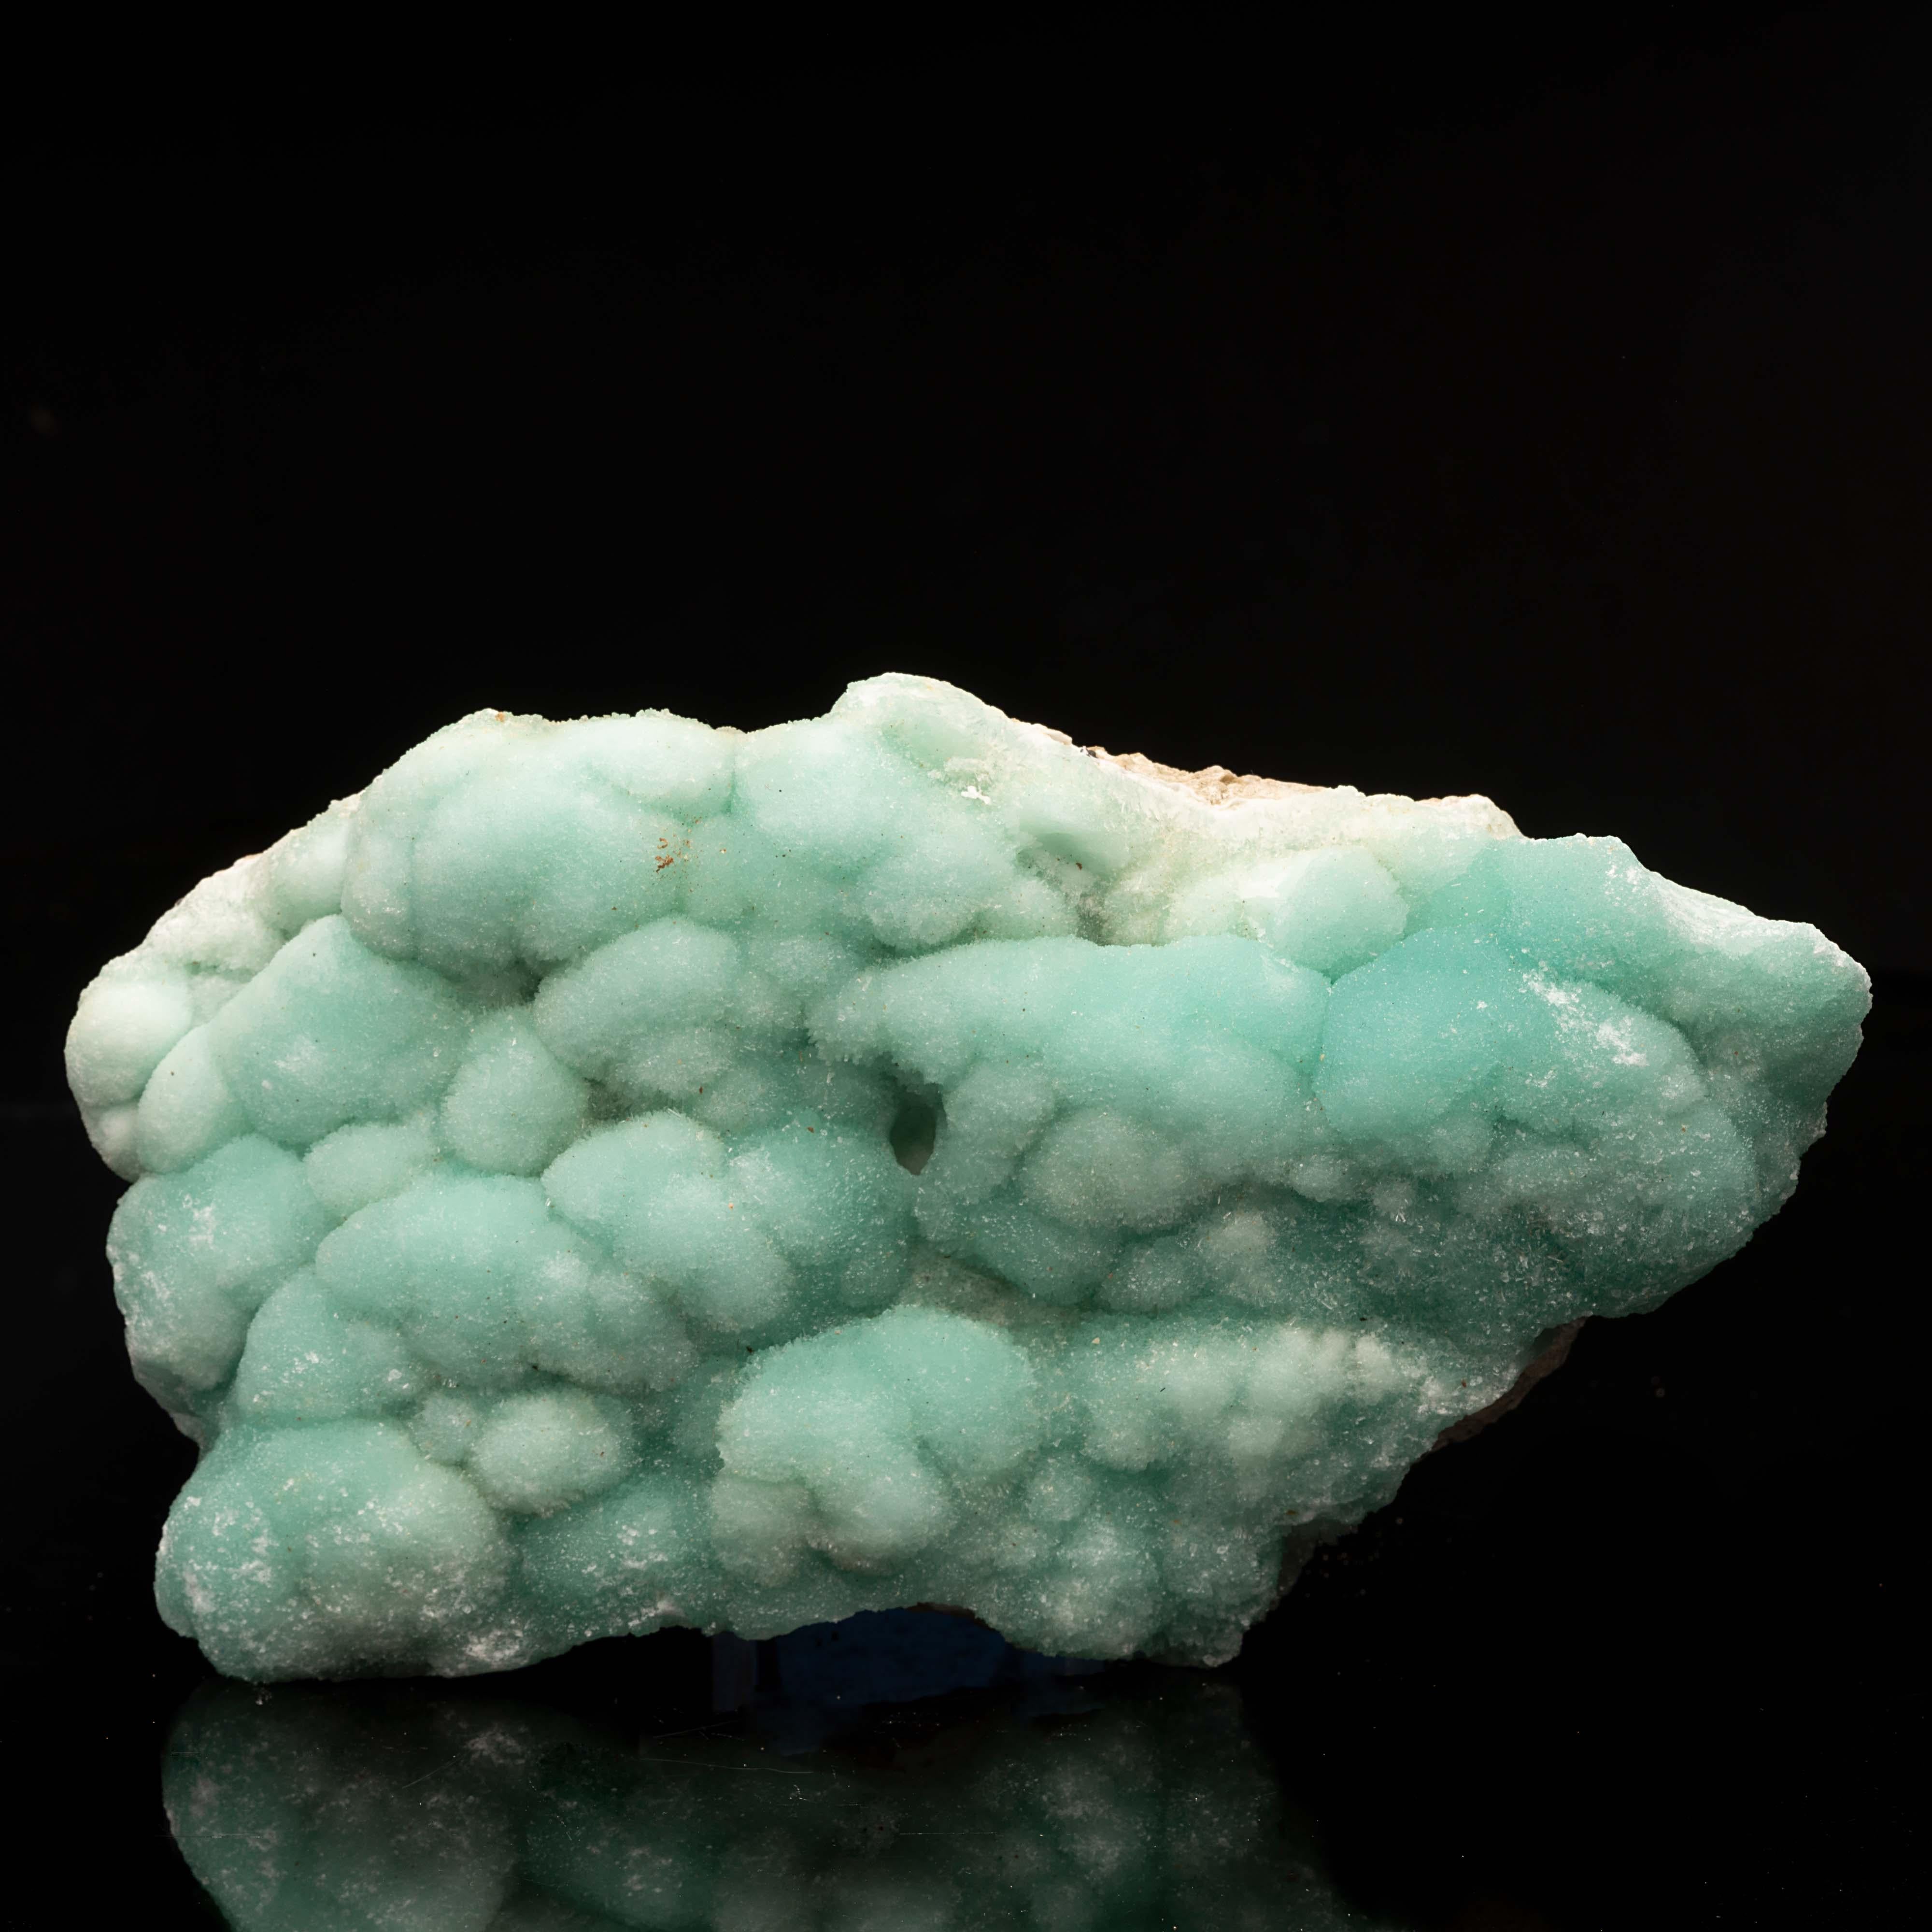 This piece is a uniquely special find perfect for the discerning mineral enthusiast. It's unusual to find pieces of this calcium carbonate mineral with such spectacular color and wonderful botryoidal crystal formation, not to mention the